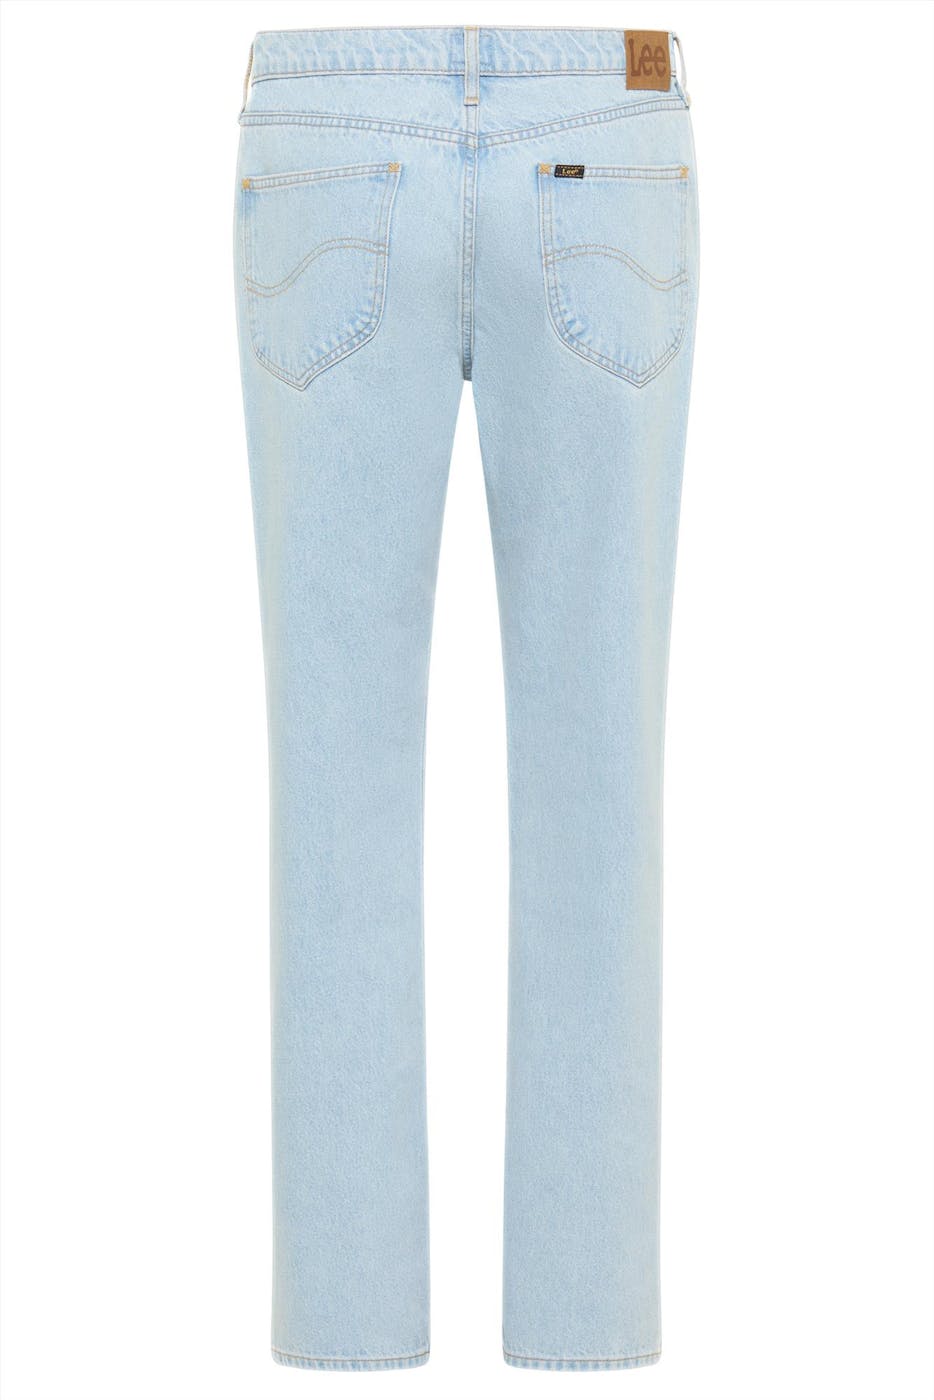 Lee - Lichtblauwe West Relaxed jeans